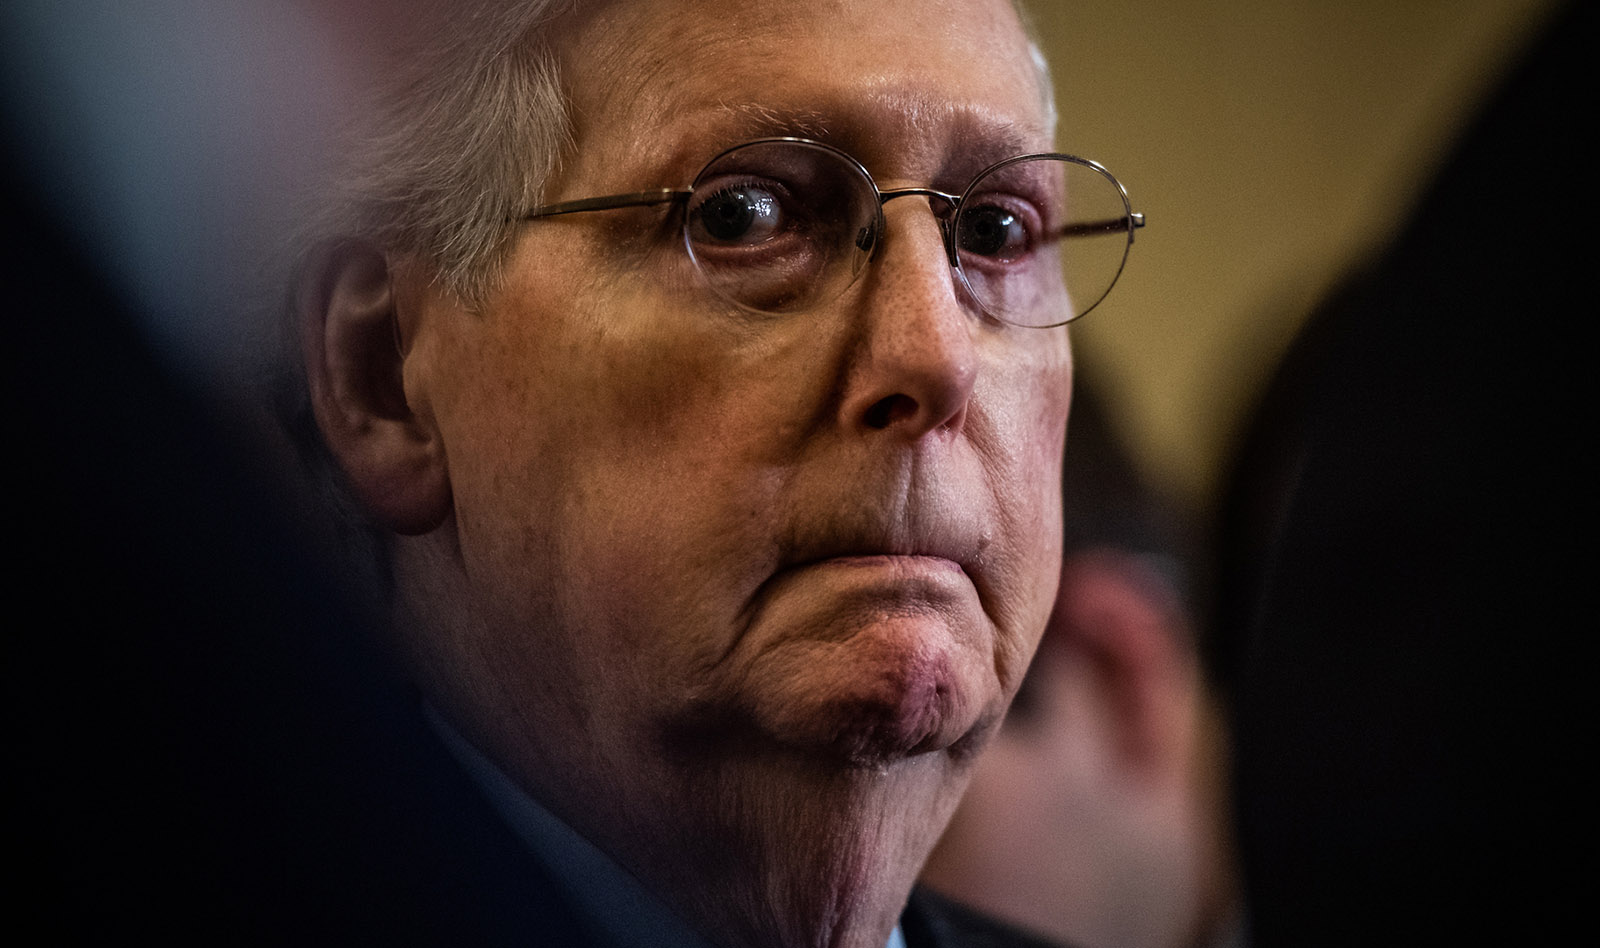 Senate Majority Leader Mitch McConnell at a Capitol Hill news conference, Washington, D.C., January 29, 2019